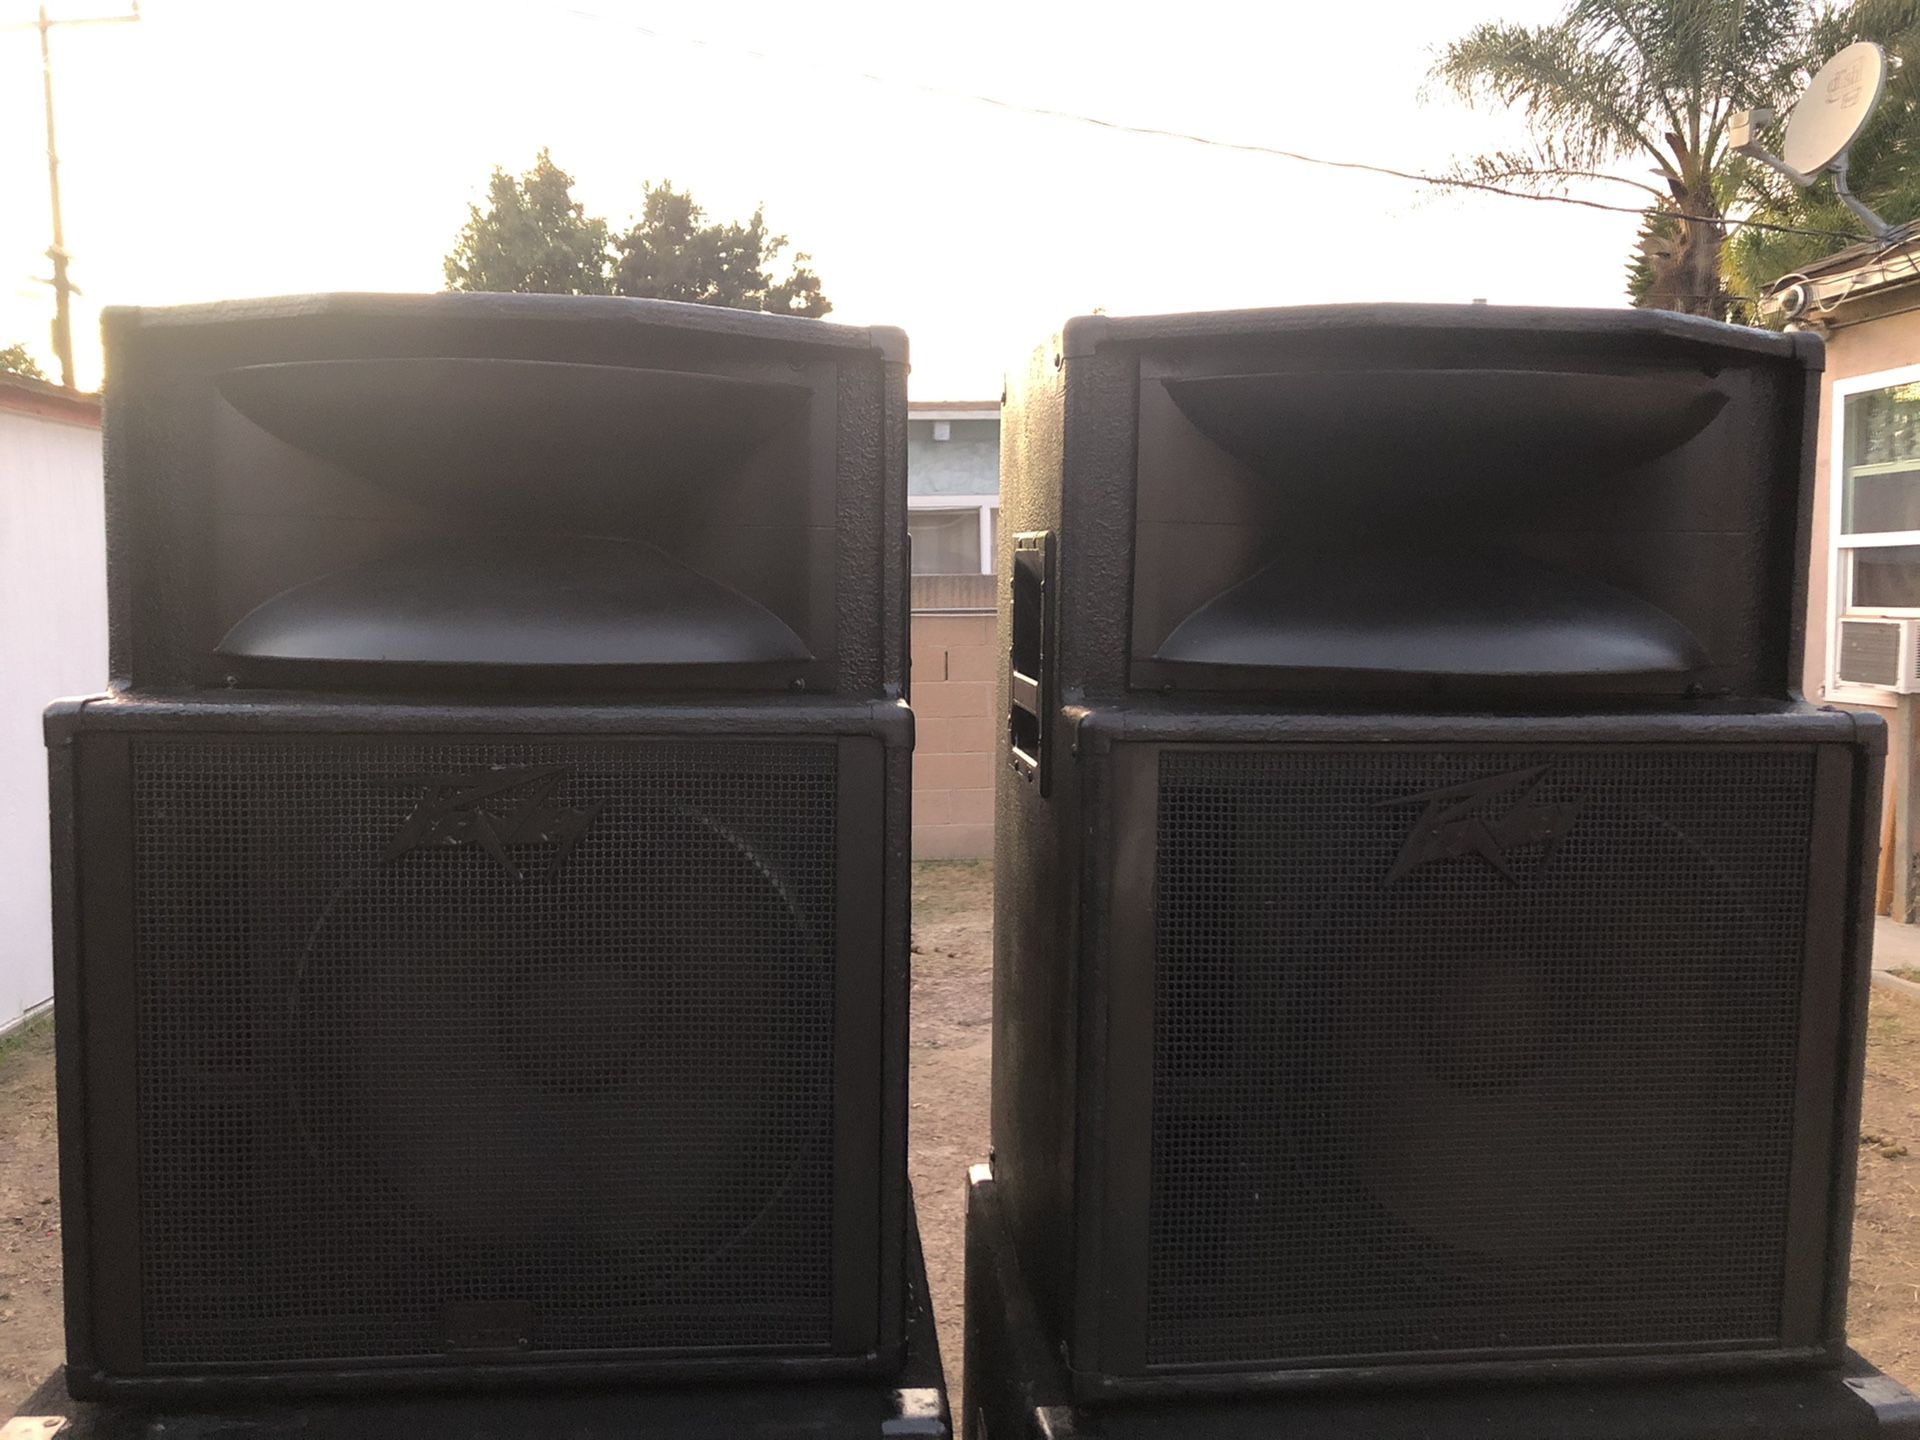 Pair of speakers peavey ready for band or v. Dj sistem 15. Inches and. Twitter good condition